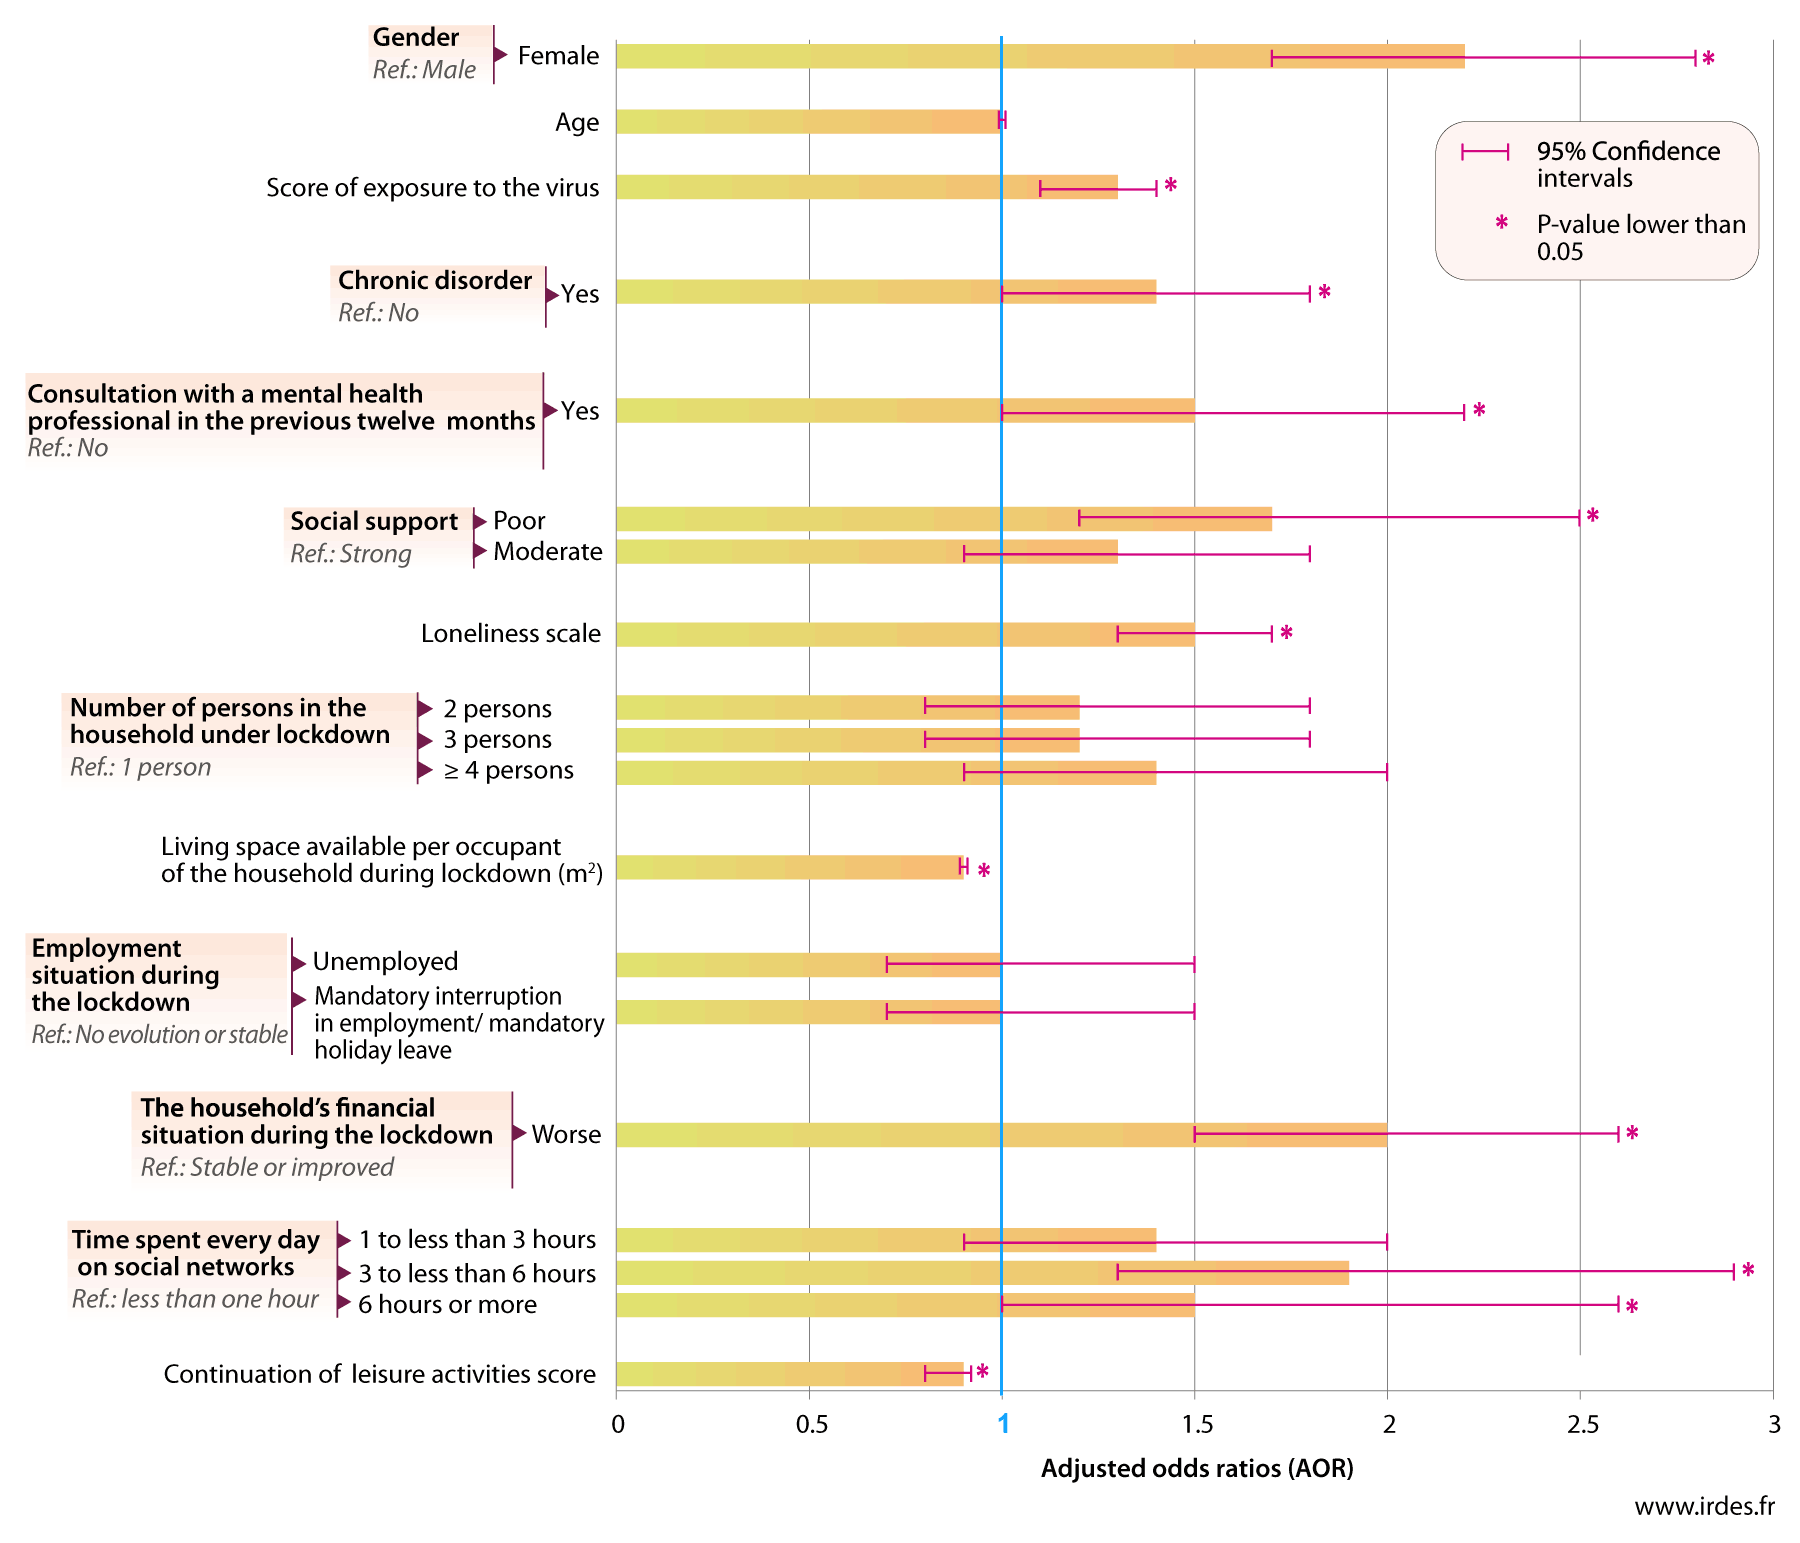 https://www.irdes.fr/english/pictures/charts/2020-06-factors-linked-to-the-onset-of-psychological-distress-during-the-lockdown-linked-to-the-covid-19-outbreak.gif